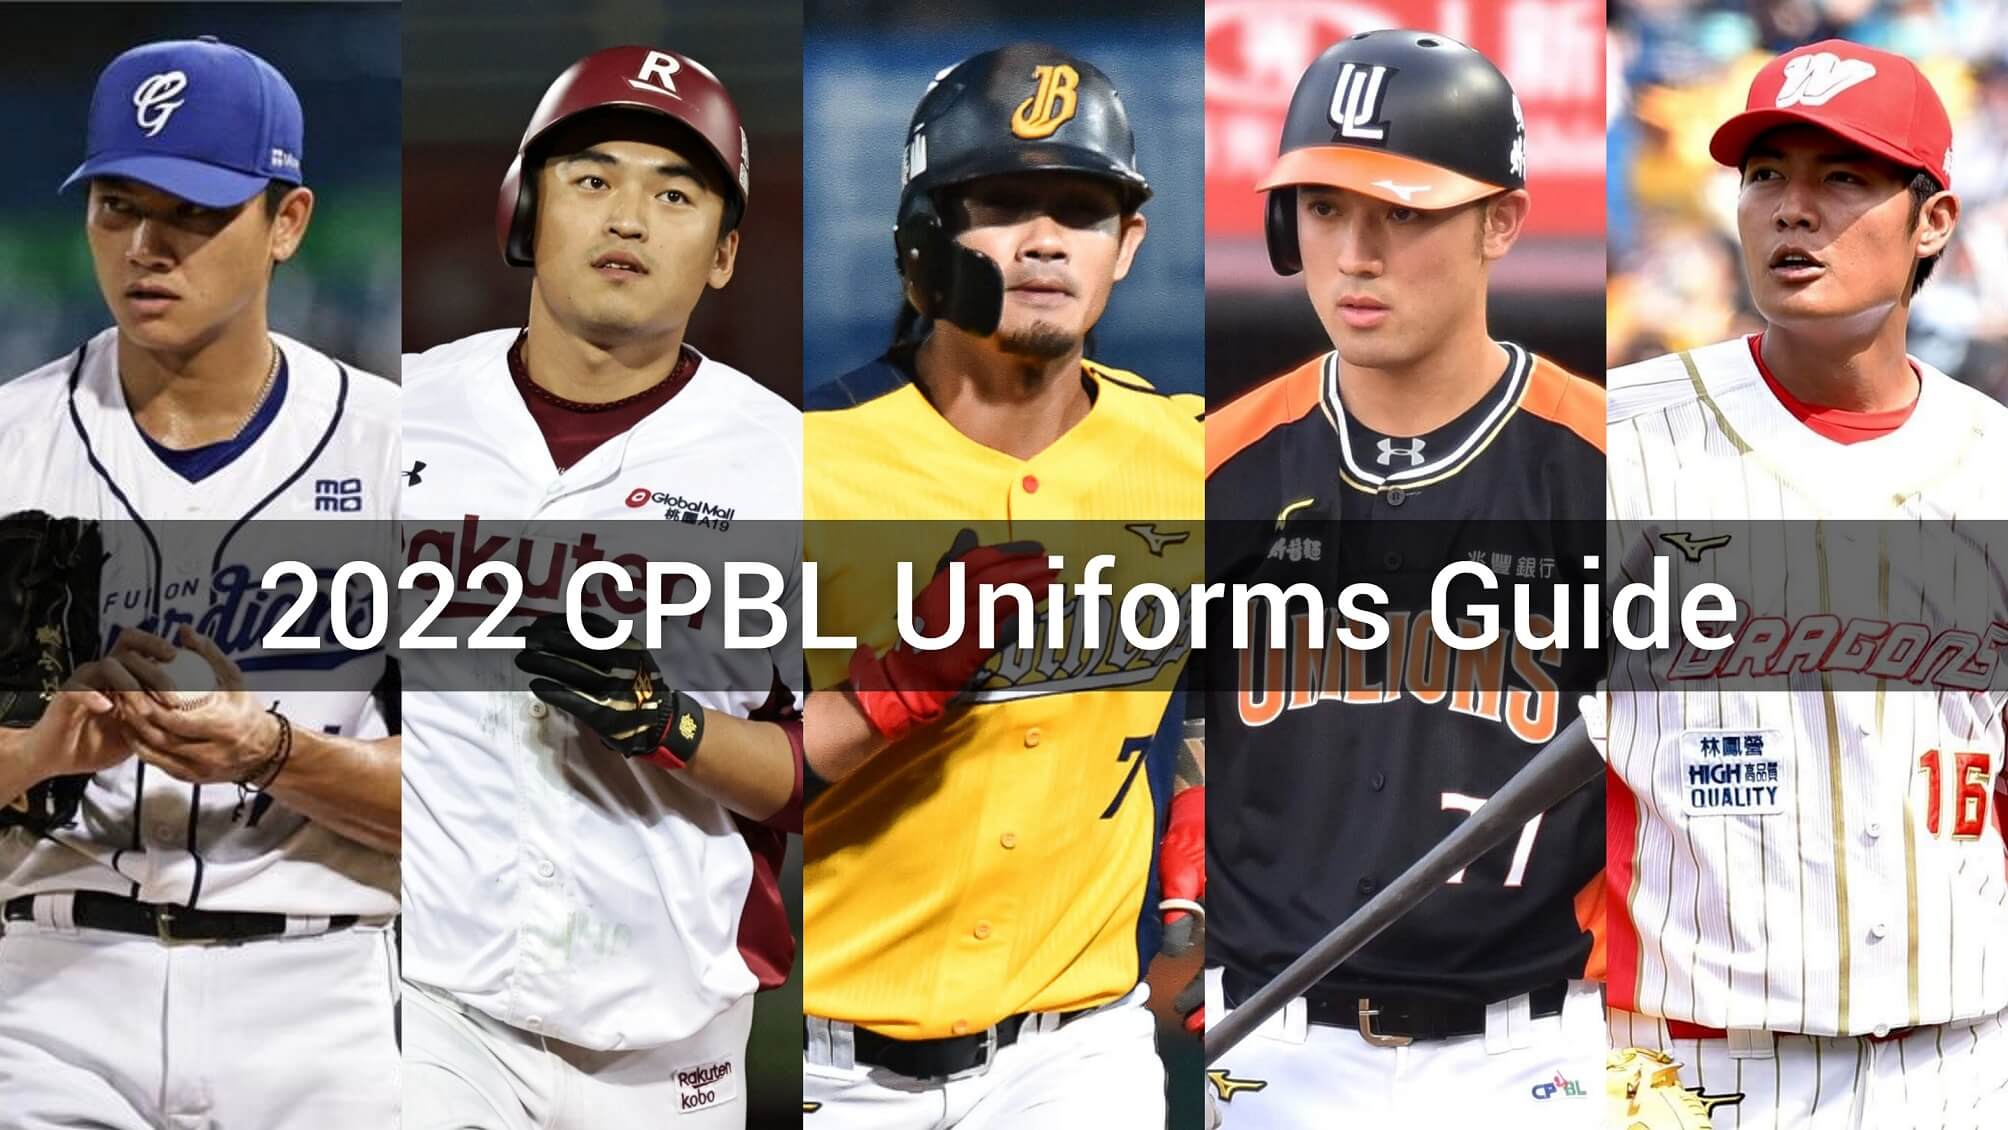 2022 CPBL Uniforms Guide